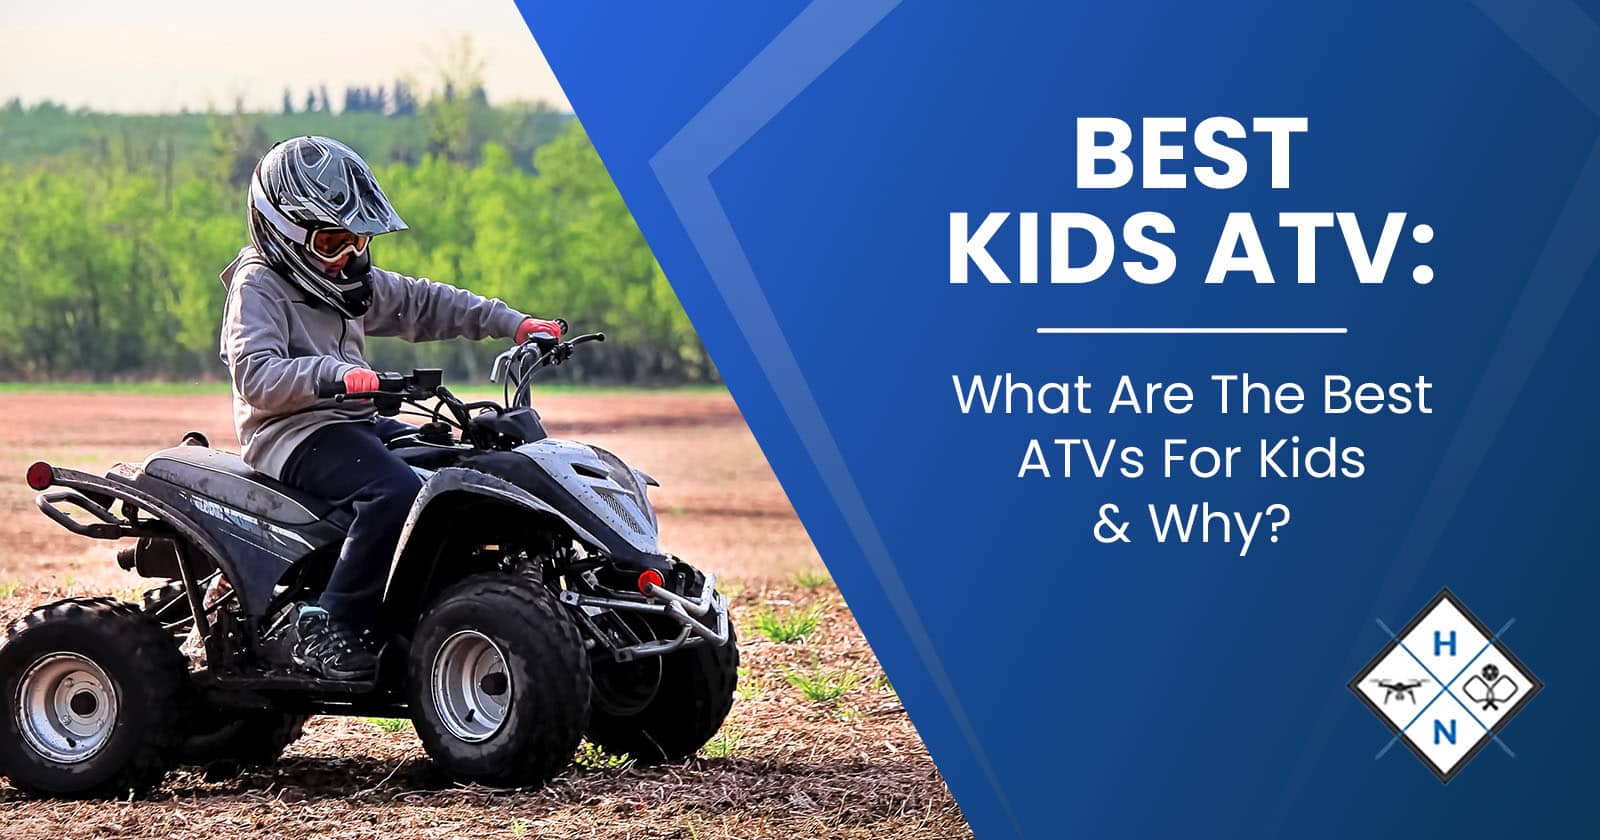 Best Kids ATV: What Are The Best ATVs For Kids &#038; Why?